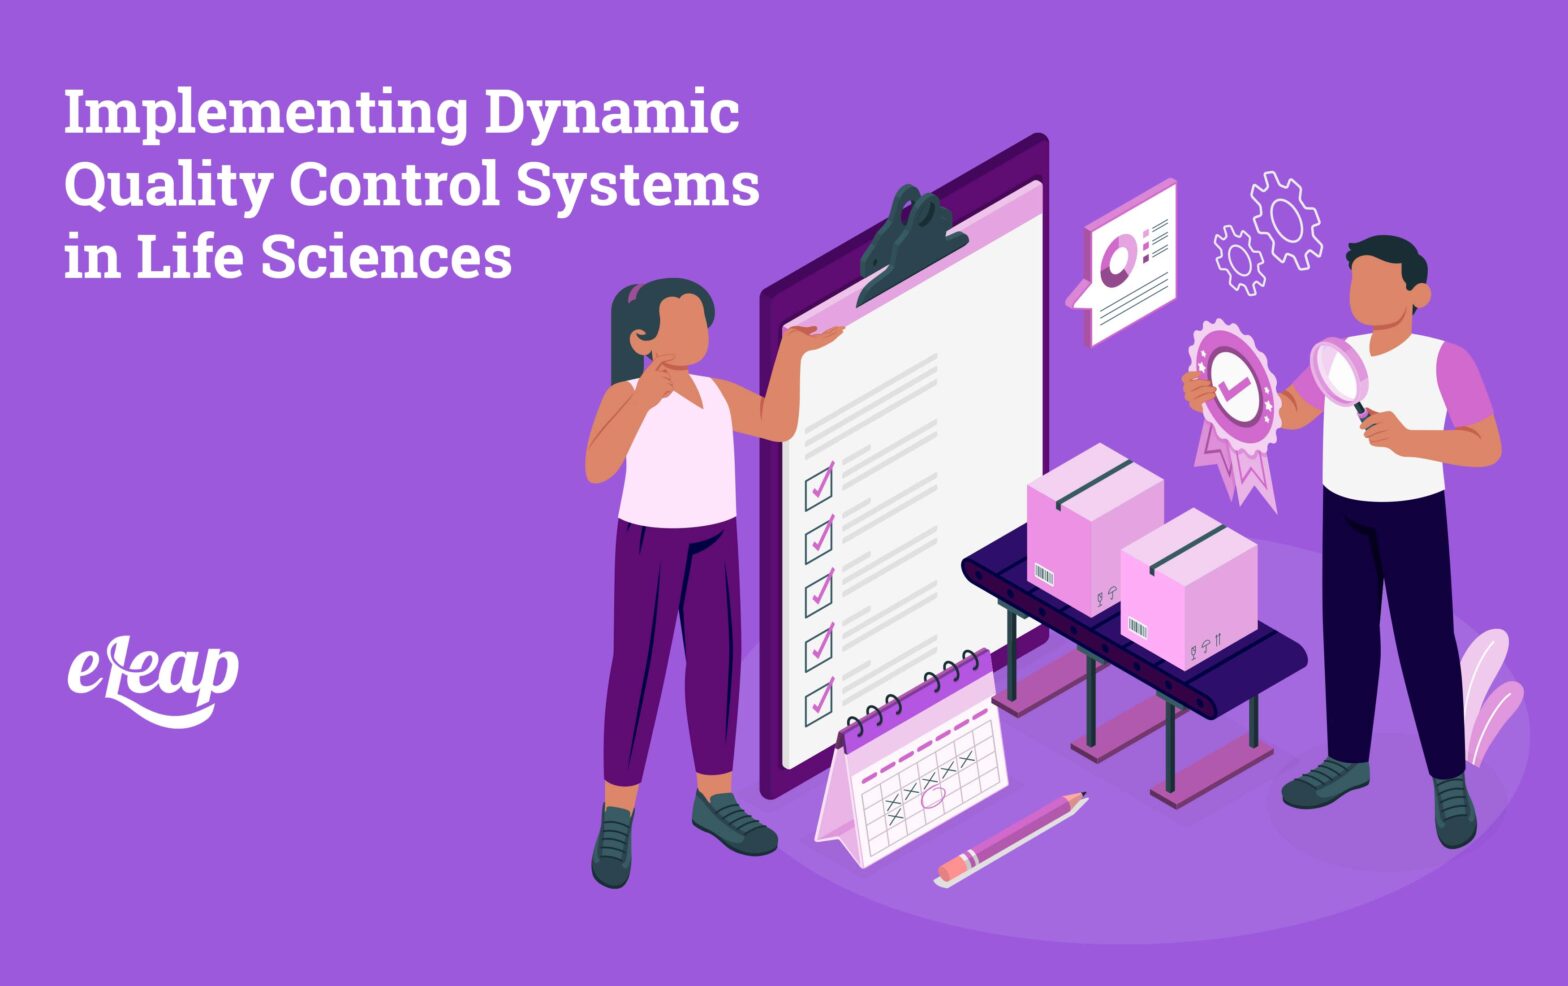 Implementing Dynamic Quality Control Systems in Life Sciences